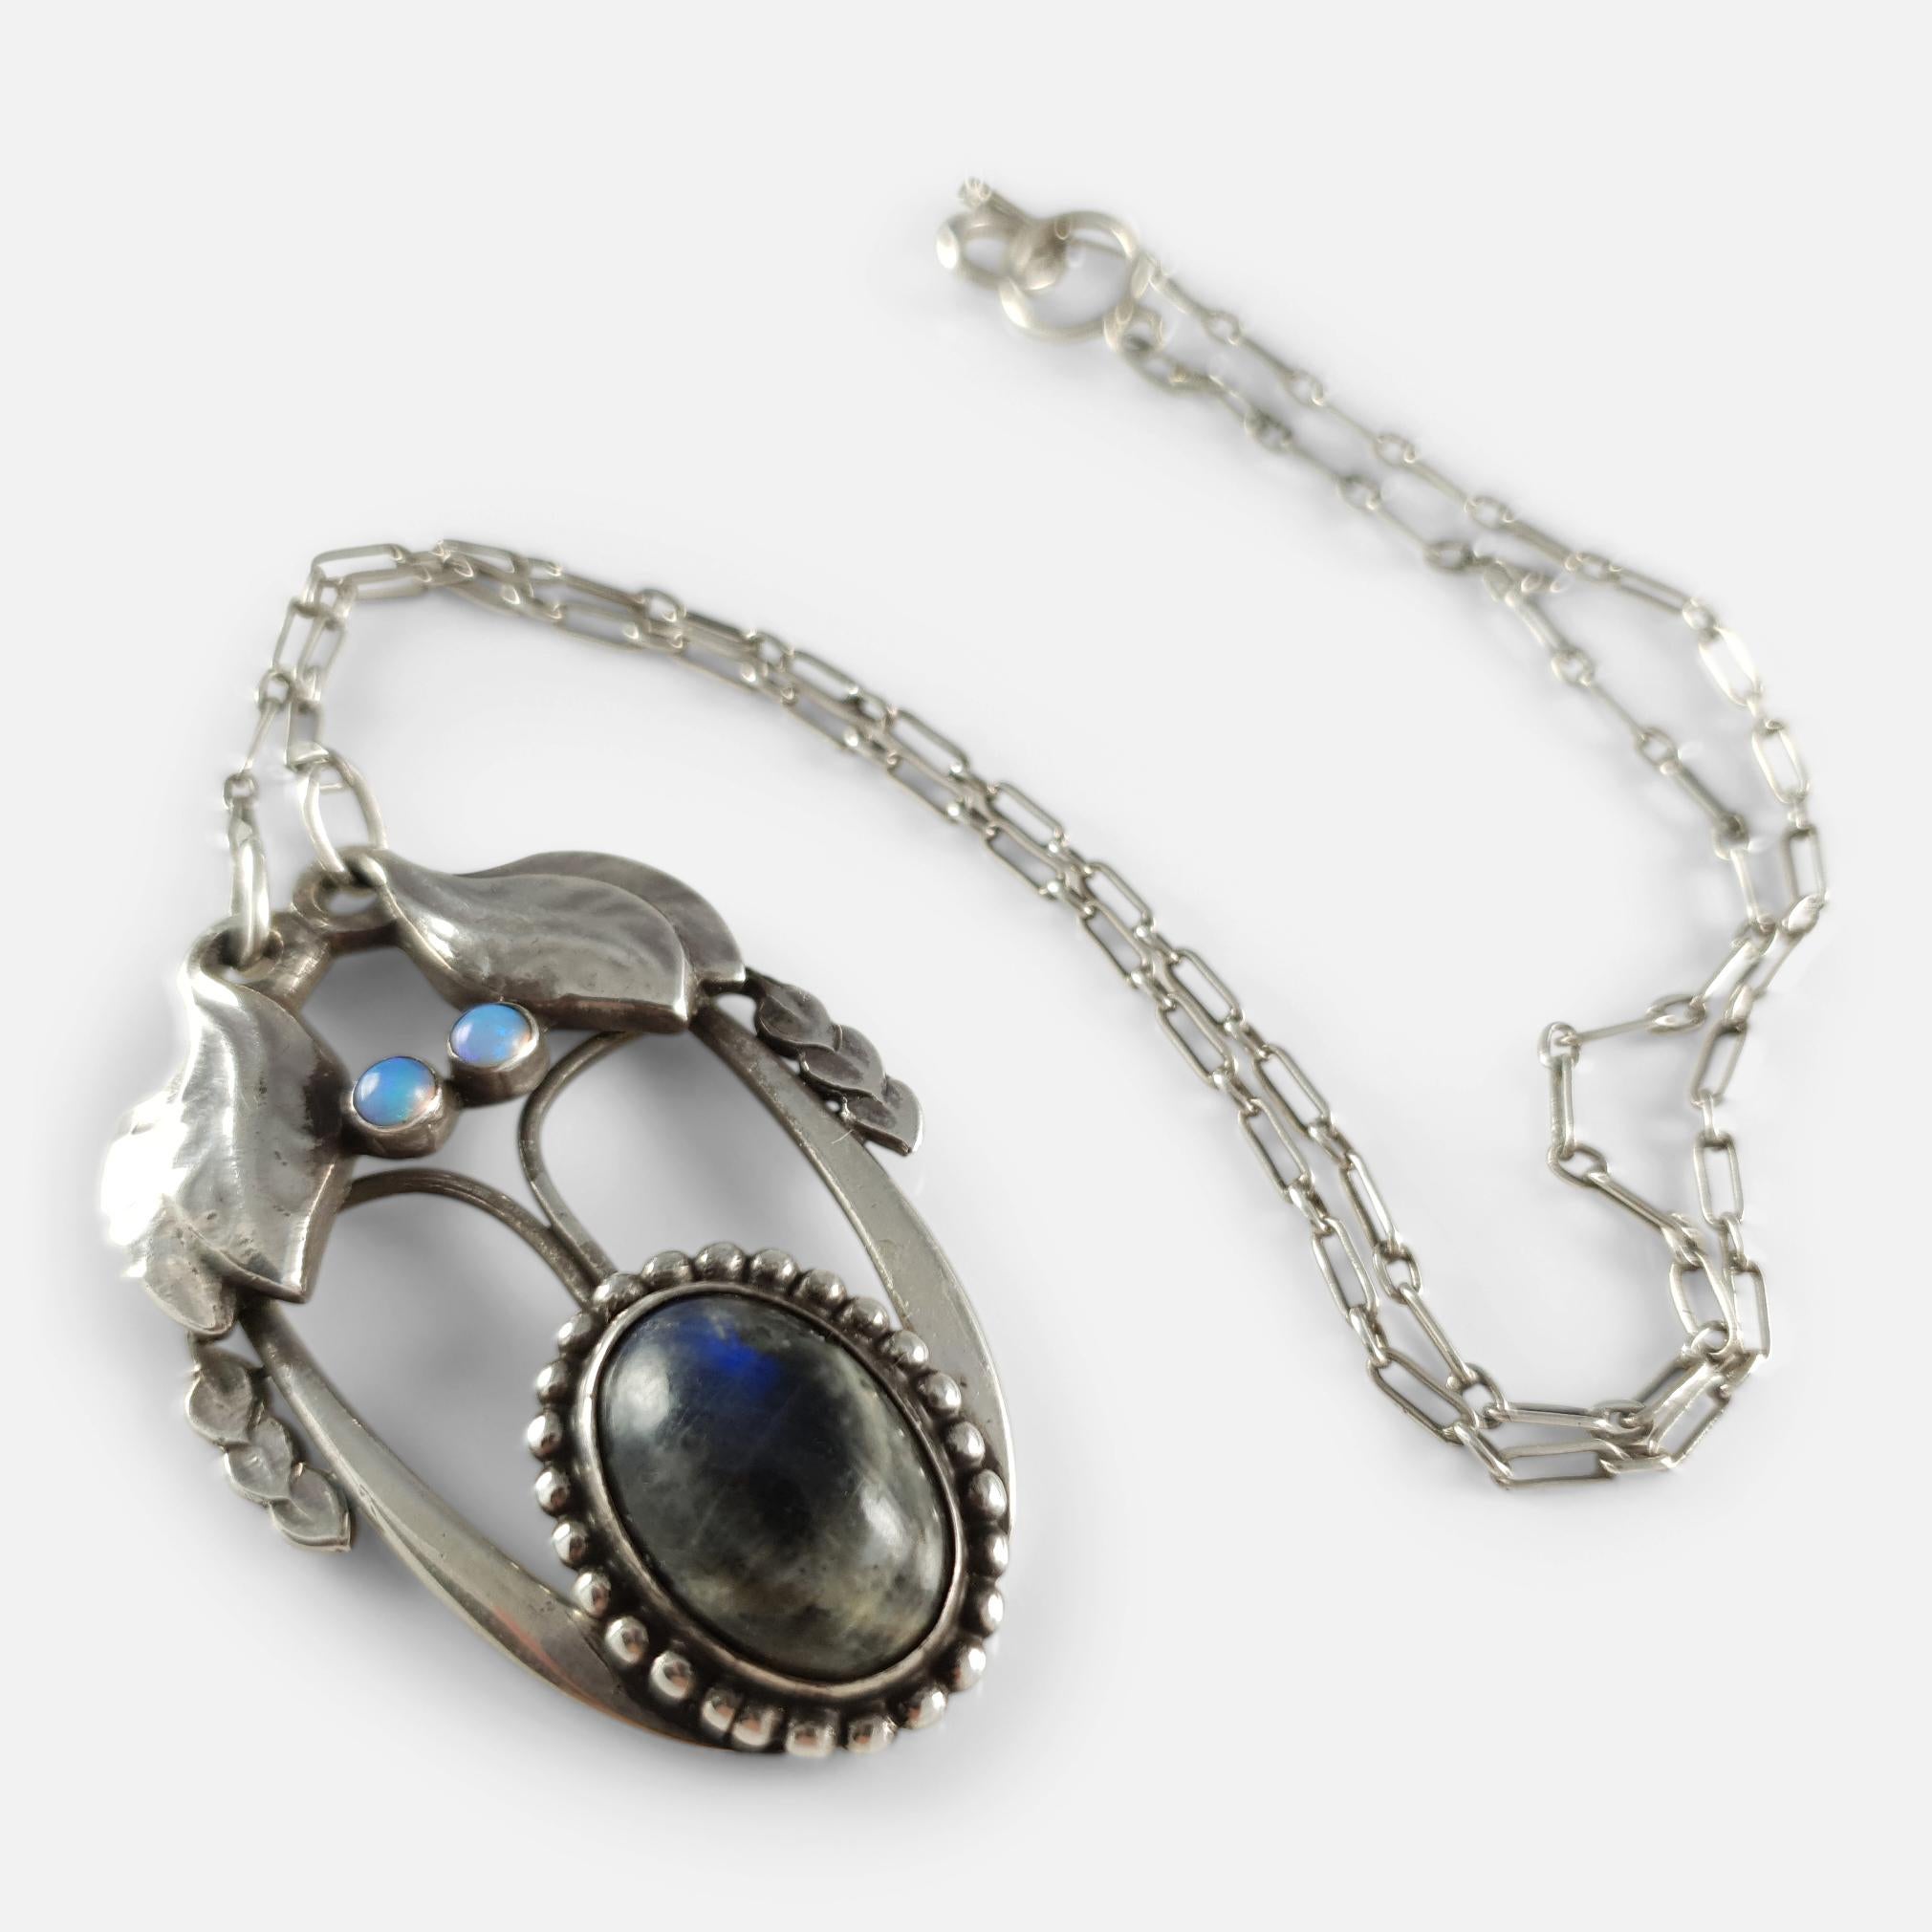 Georg Jensen Silver Opal and Labradorite Cabochon Pendant Necklace #4 c1904-1908 In Good Condition For Sale In Glasgow, GB